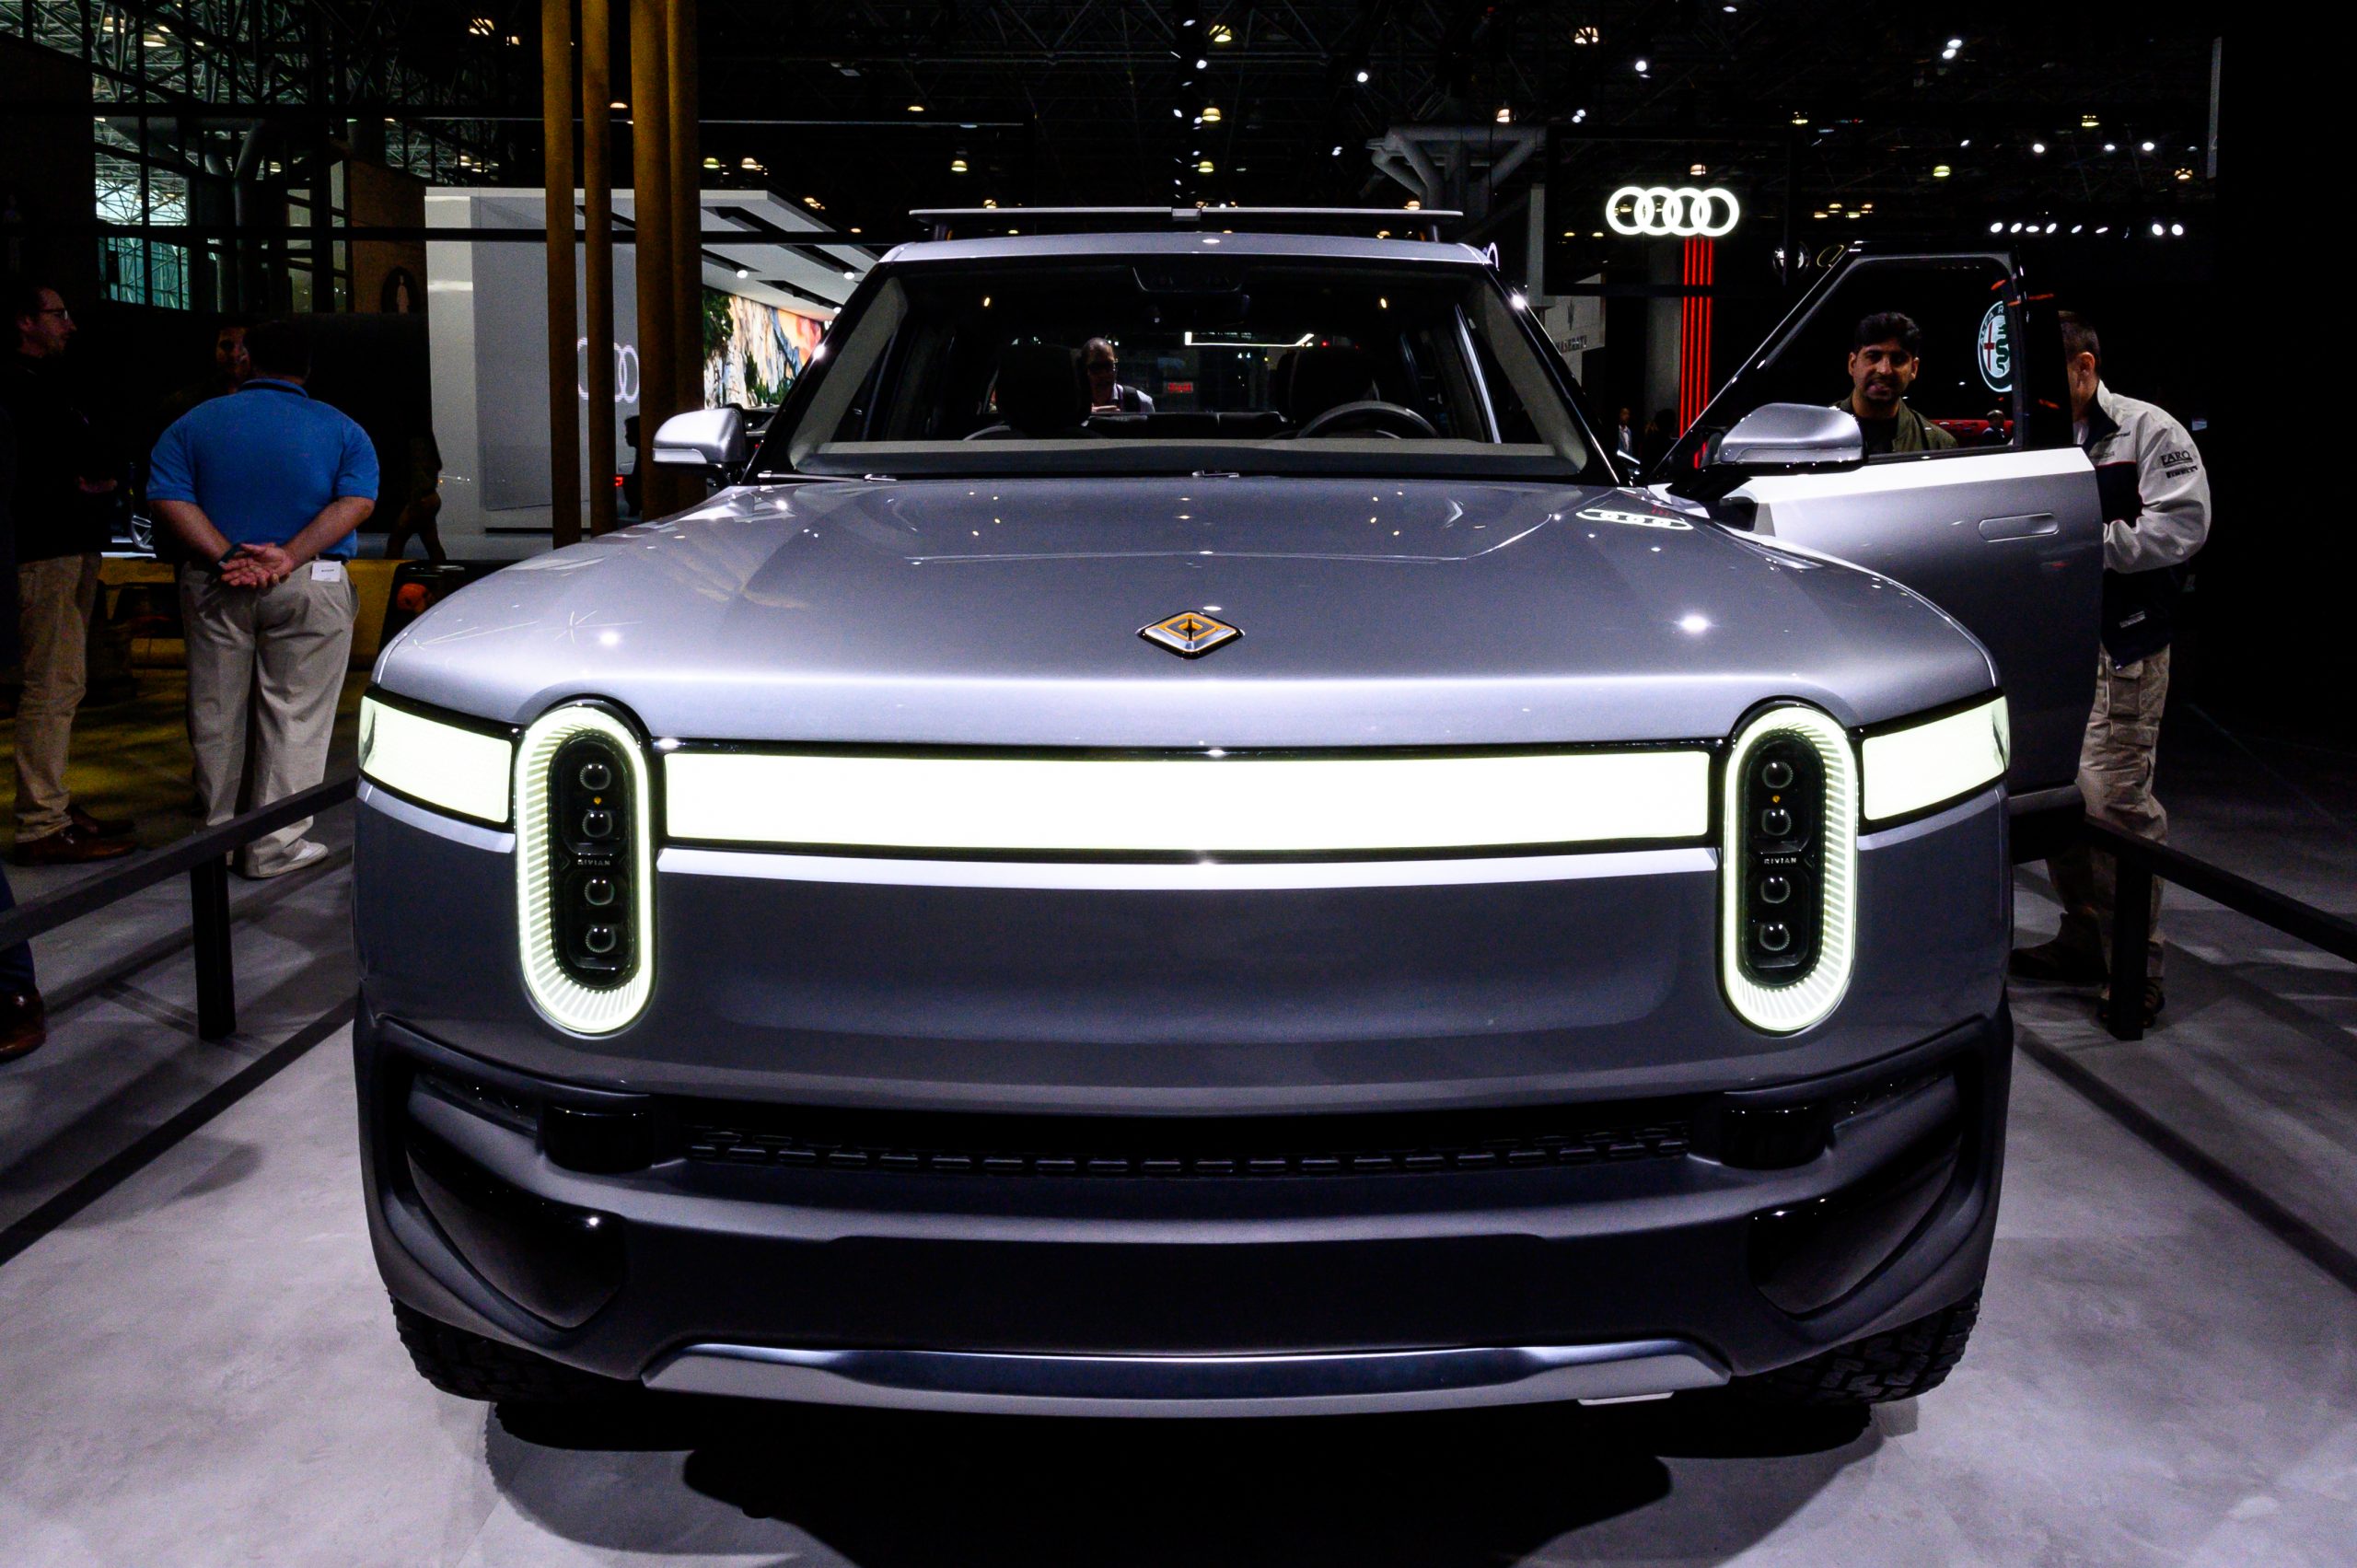 Rivian R1T seen at the New York International Auto Show at the Jacob K. Javits Convention Center in New York.